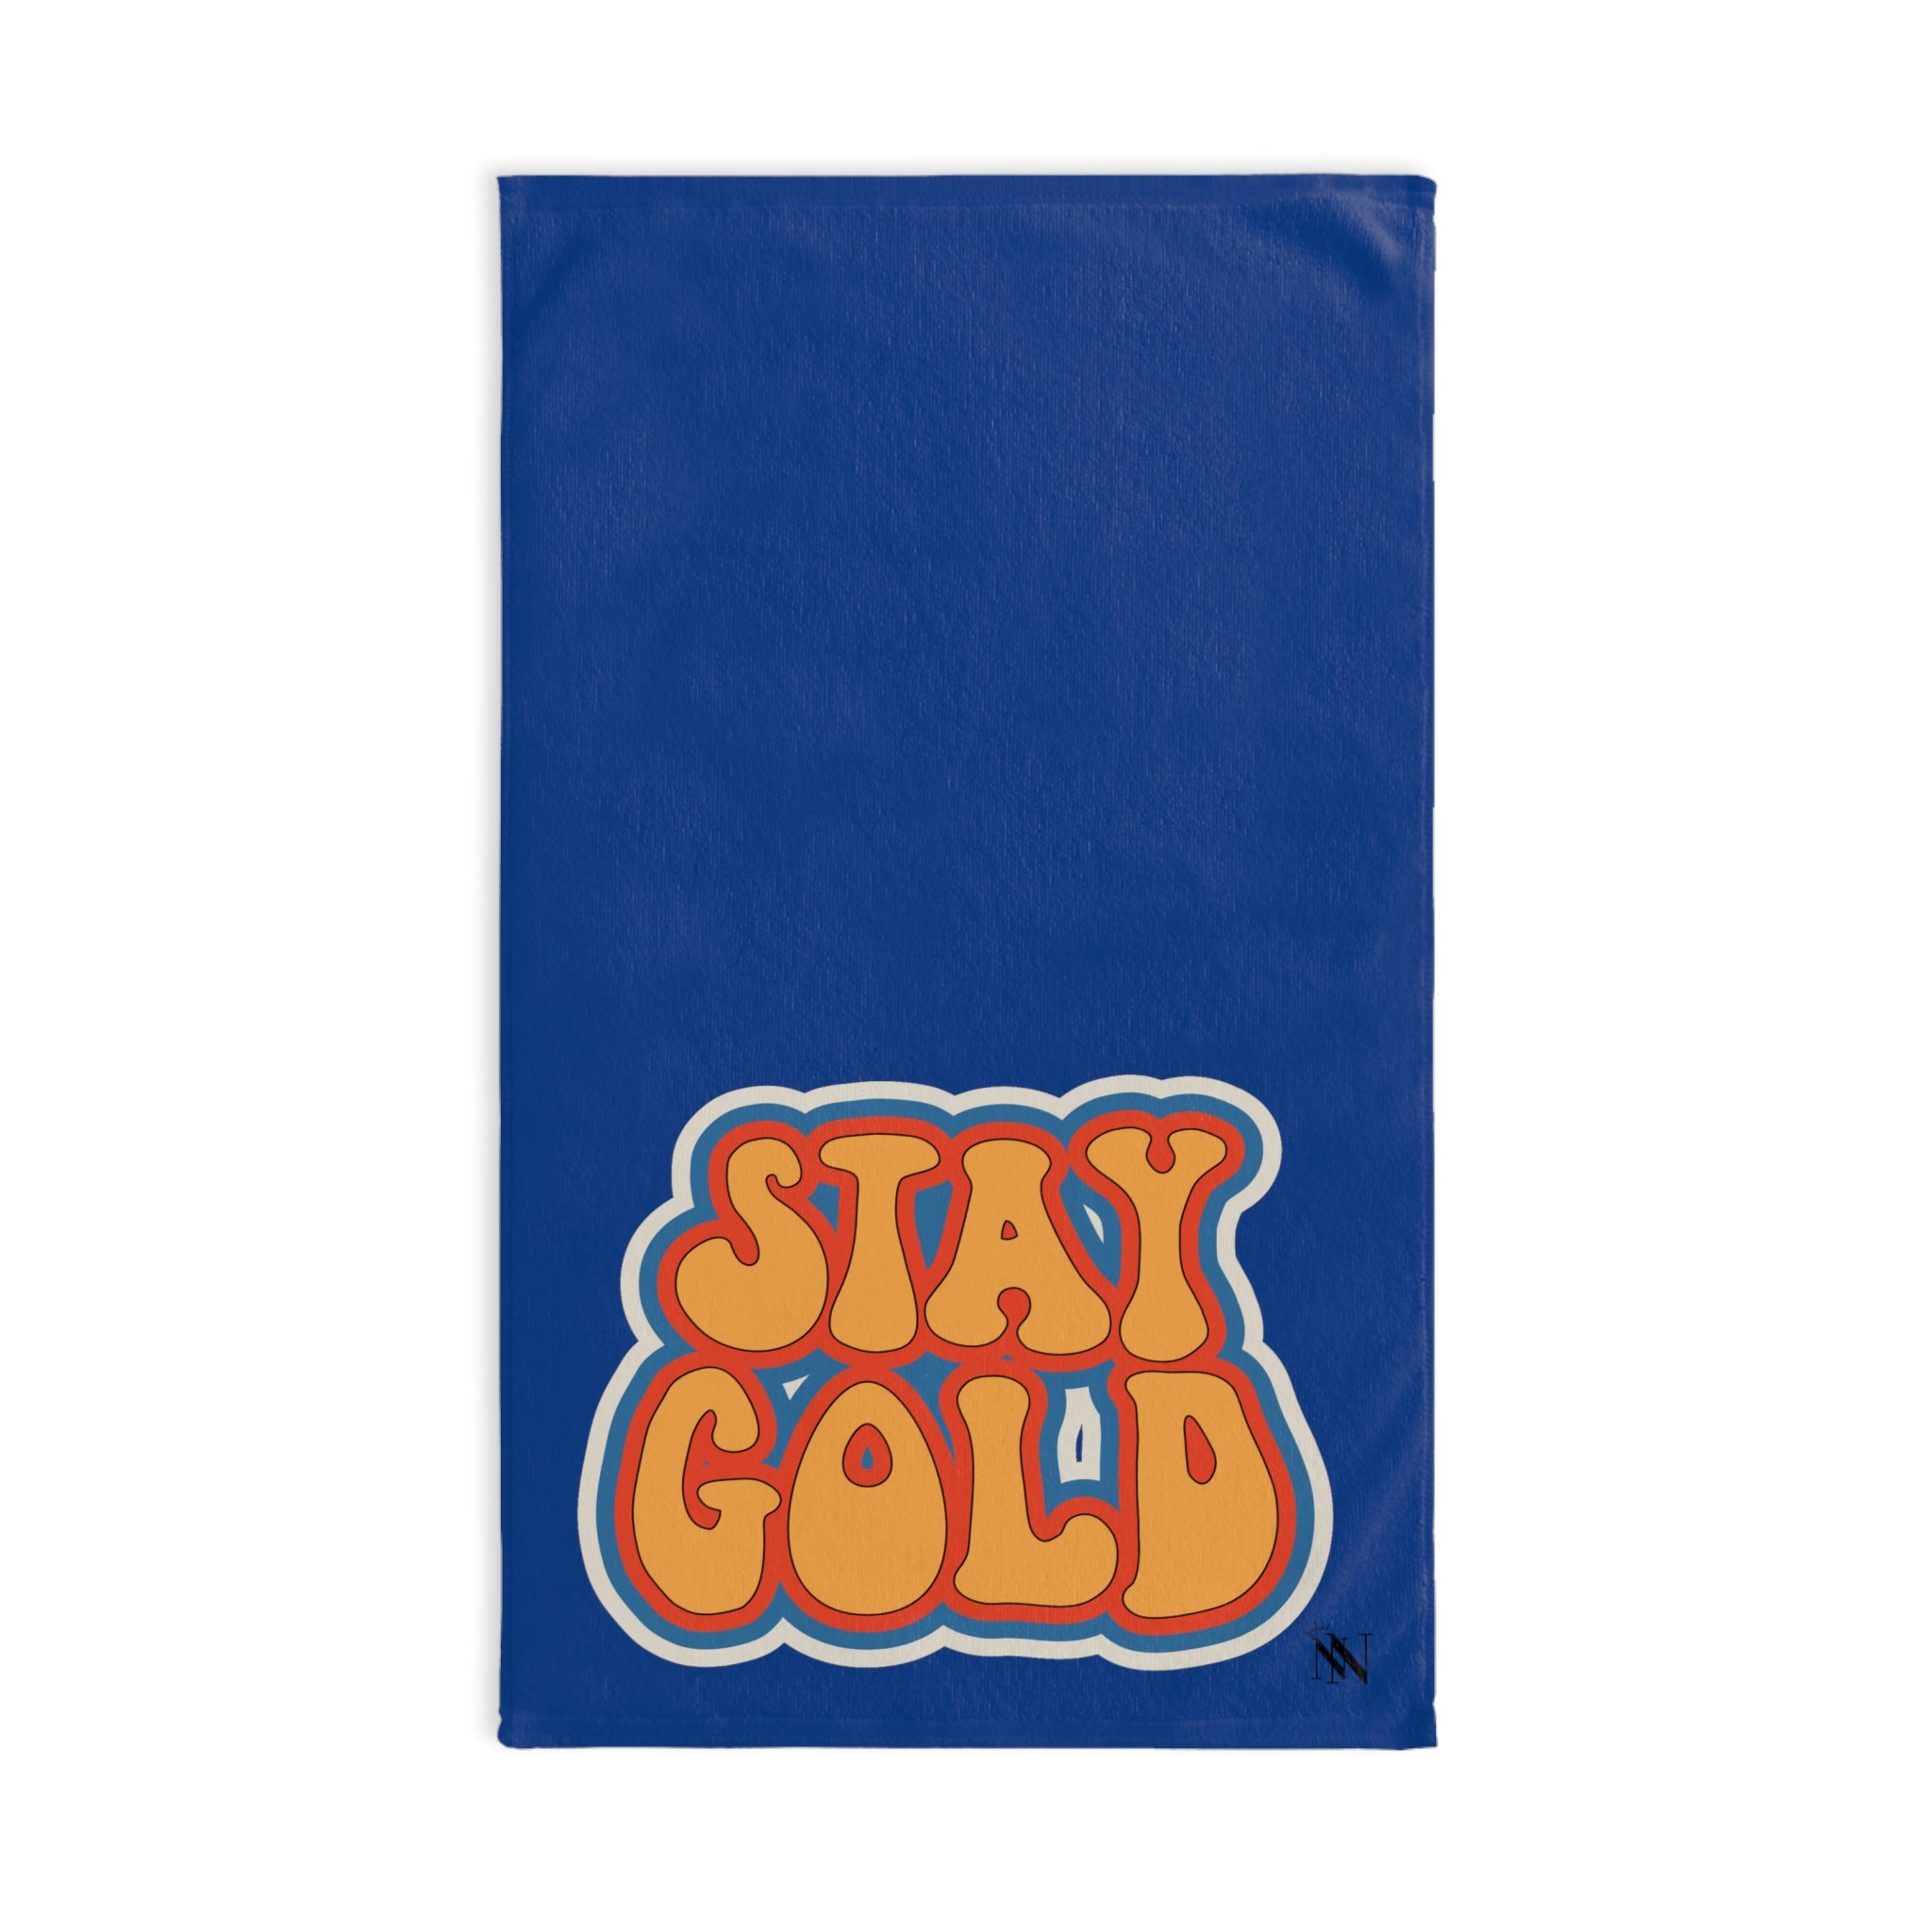 Stay Gold Retro Blue | Gifts for Boyfriend, Funny Towel Romantic Gift for Wedding Couple Fiance First Year Anniversary Valentines, Party Gag Gifts, Joke Humor Cloth for Husband Men BF NECTAR NAPKINS